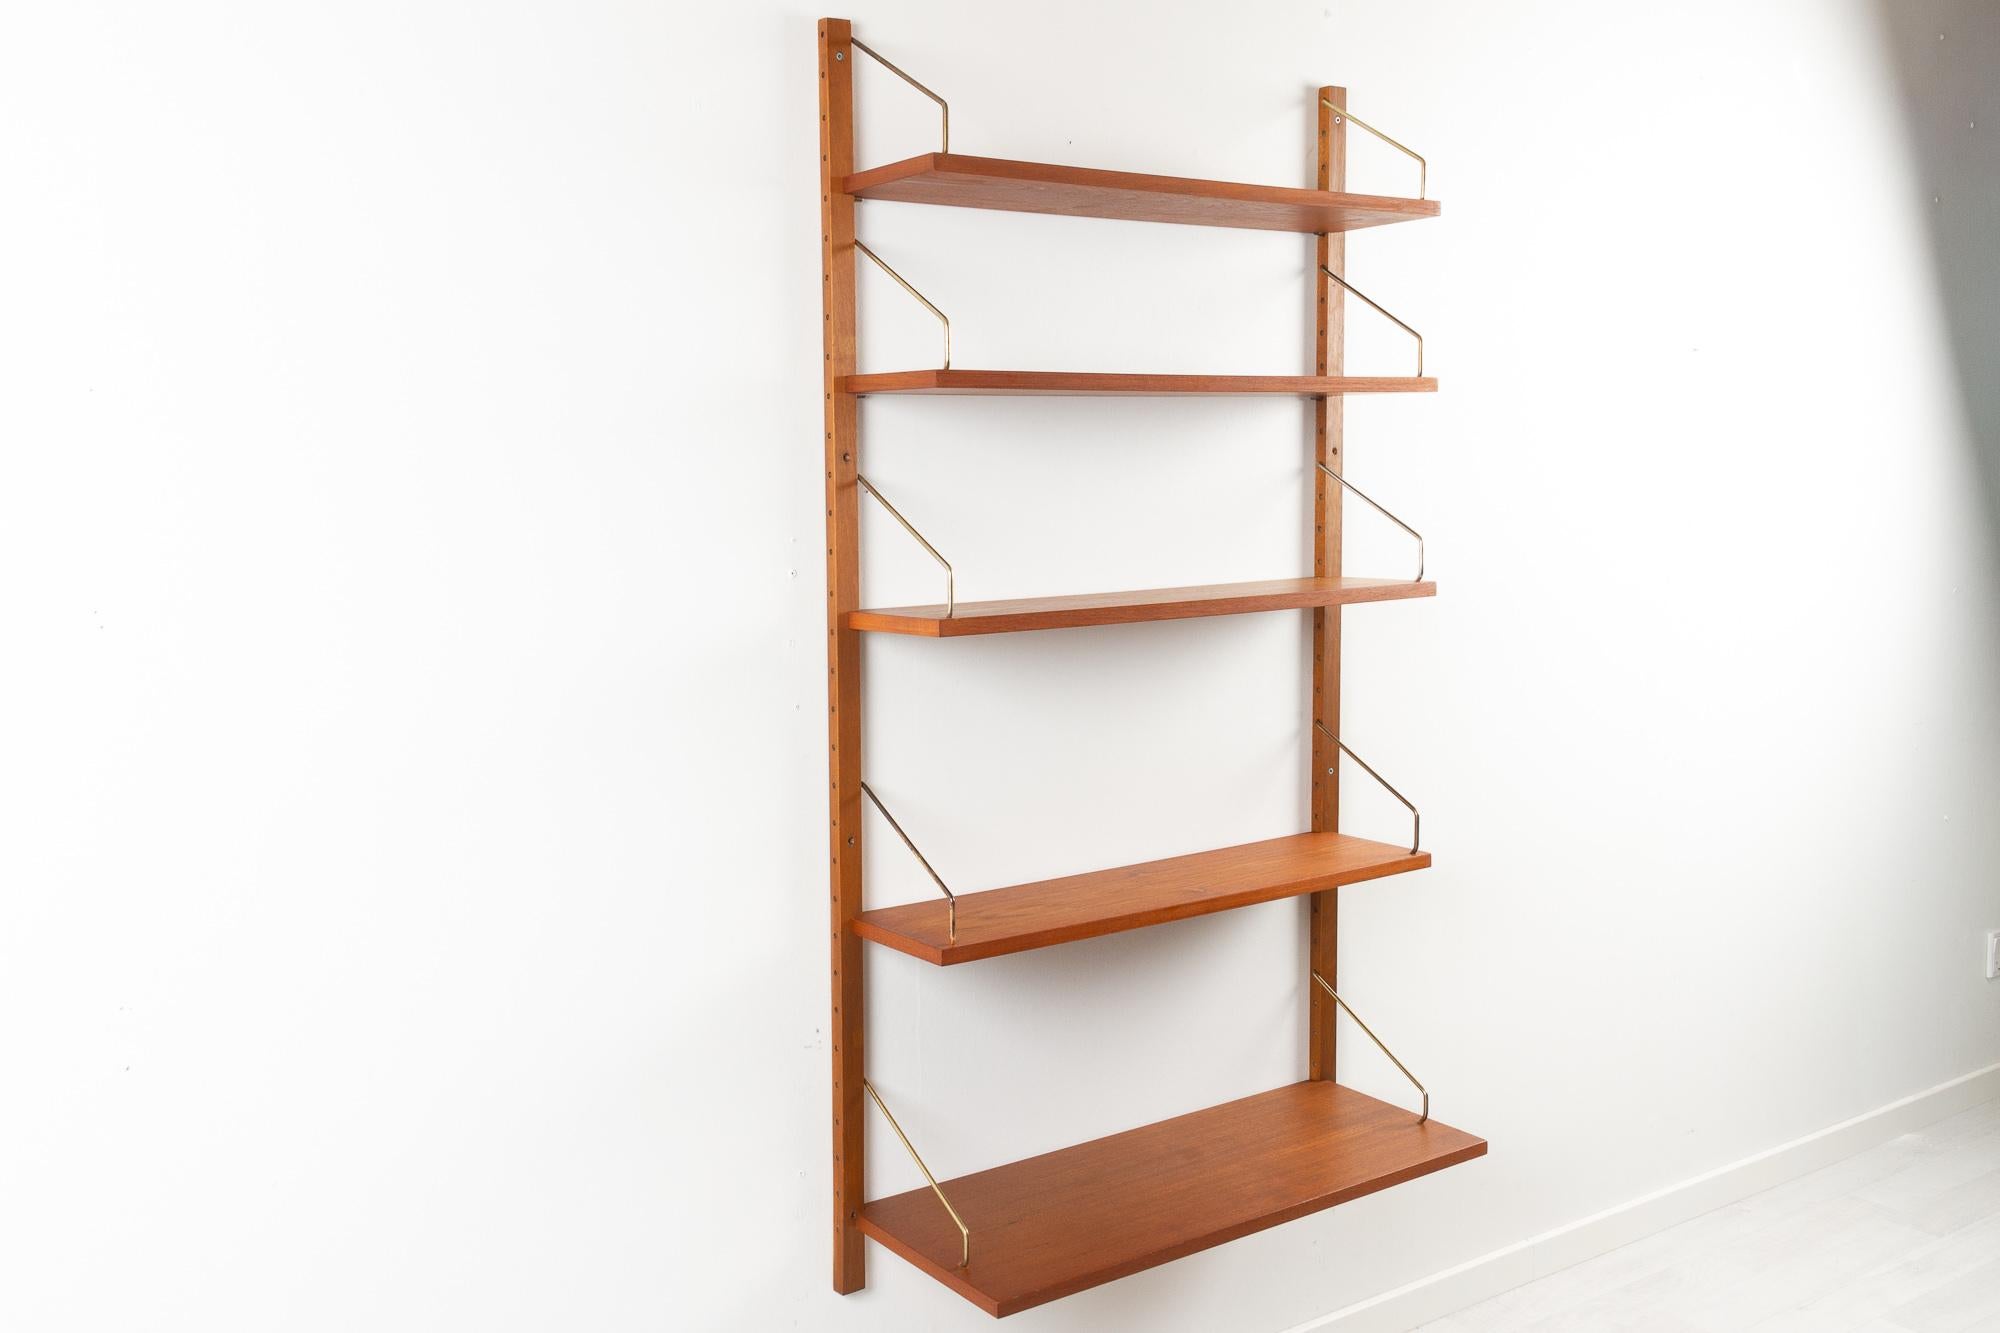 Vintage Danish teak wall unit by Poul Cadovius for Cado, 1960s.

Mid-Century Modern 1 bay shelving system model Royal. This is a original vintage floating bookcase designed in 1948 by Danish architect Poul Cadovius. 
Cadovius had the revolutionary